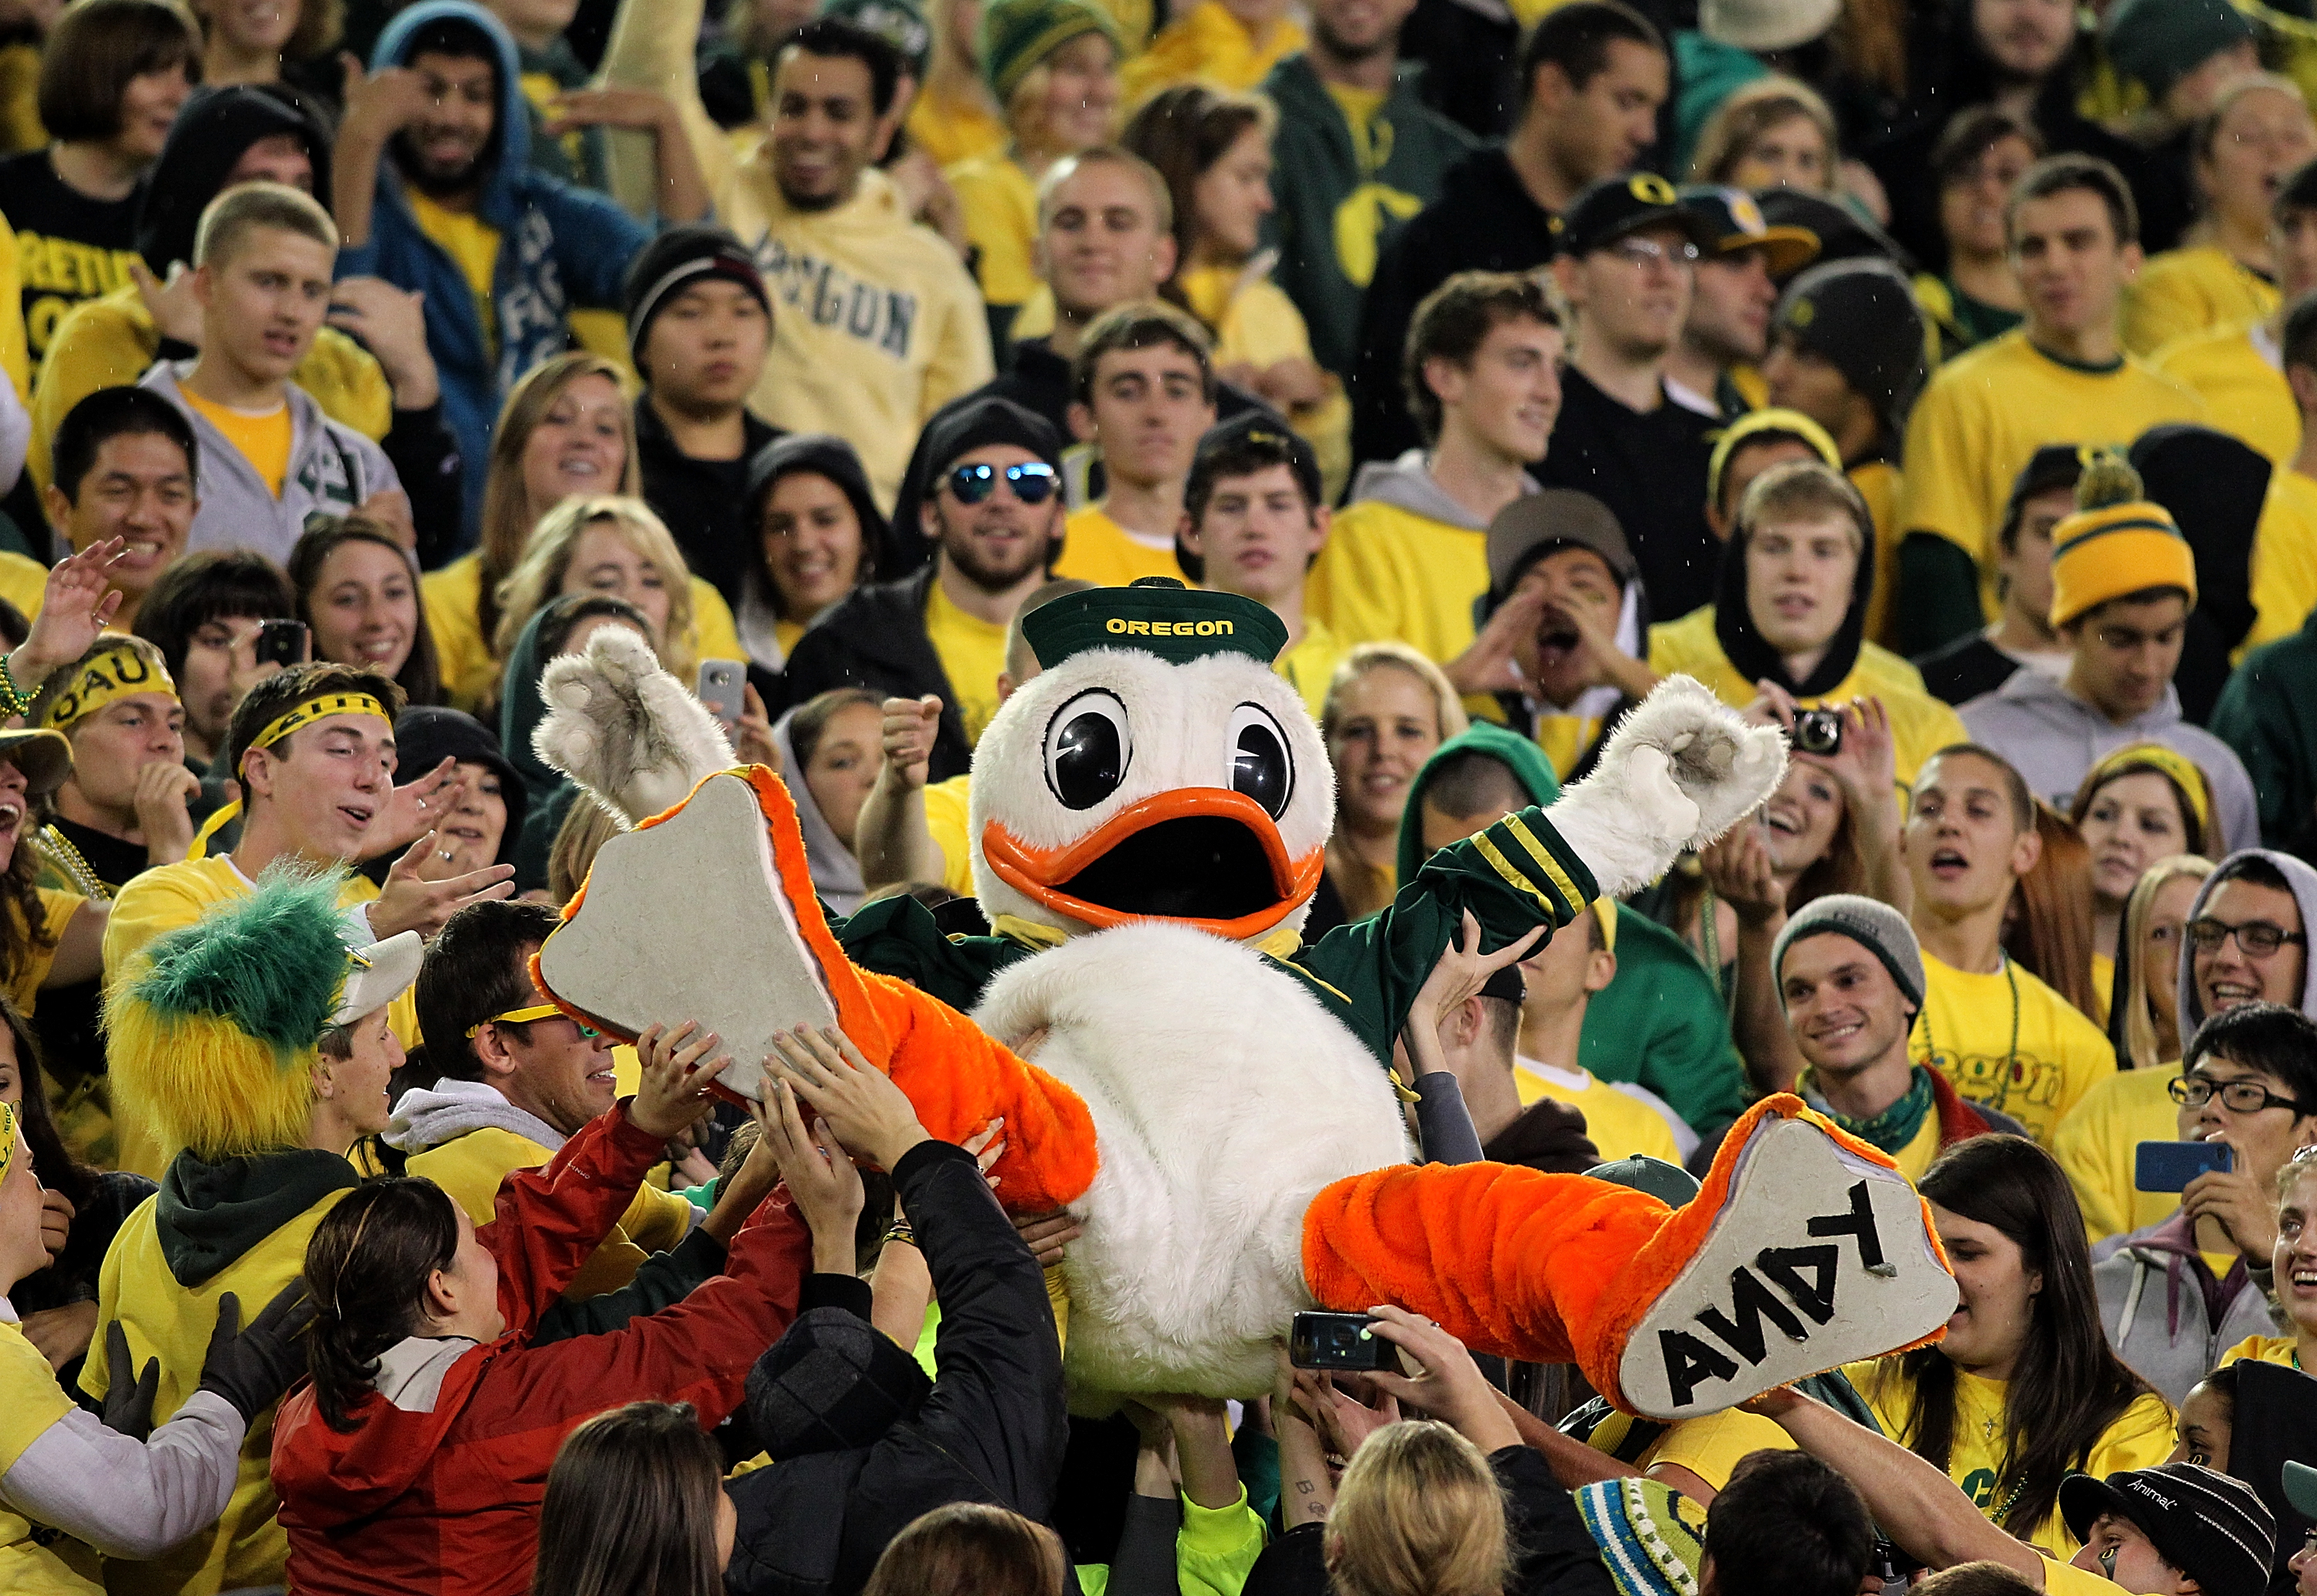 EUGENE, OR - OCTOBER 21:  The Oregon Duck mascot is lifted into the crowd during the game against the UCLA Bruins  on October 21, 2010 at the Autzen Stadium in Eugene, Oregon.  (Photo by Jonathan Ferrey/Getty Images)